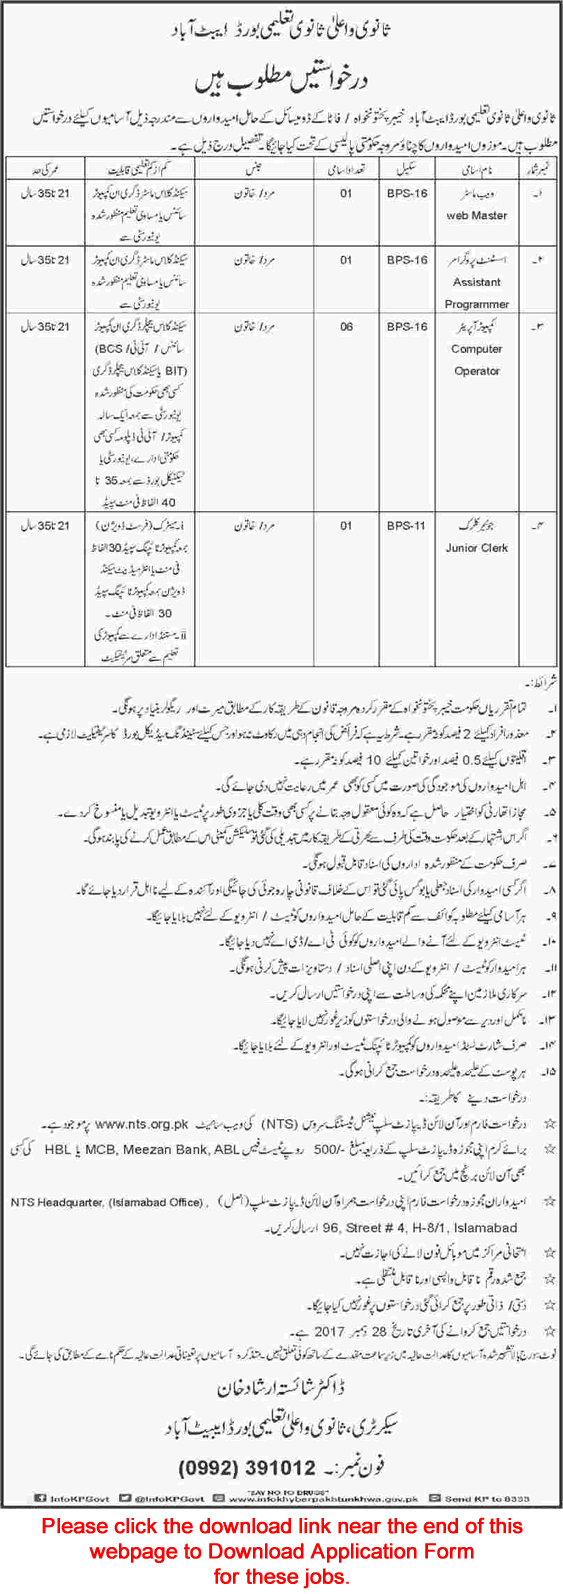 BISE Abbottabad Jobs 2017 December NTS Application Form Board of Intermediate and Secondary Education Latest